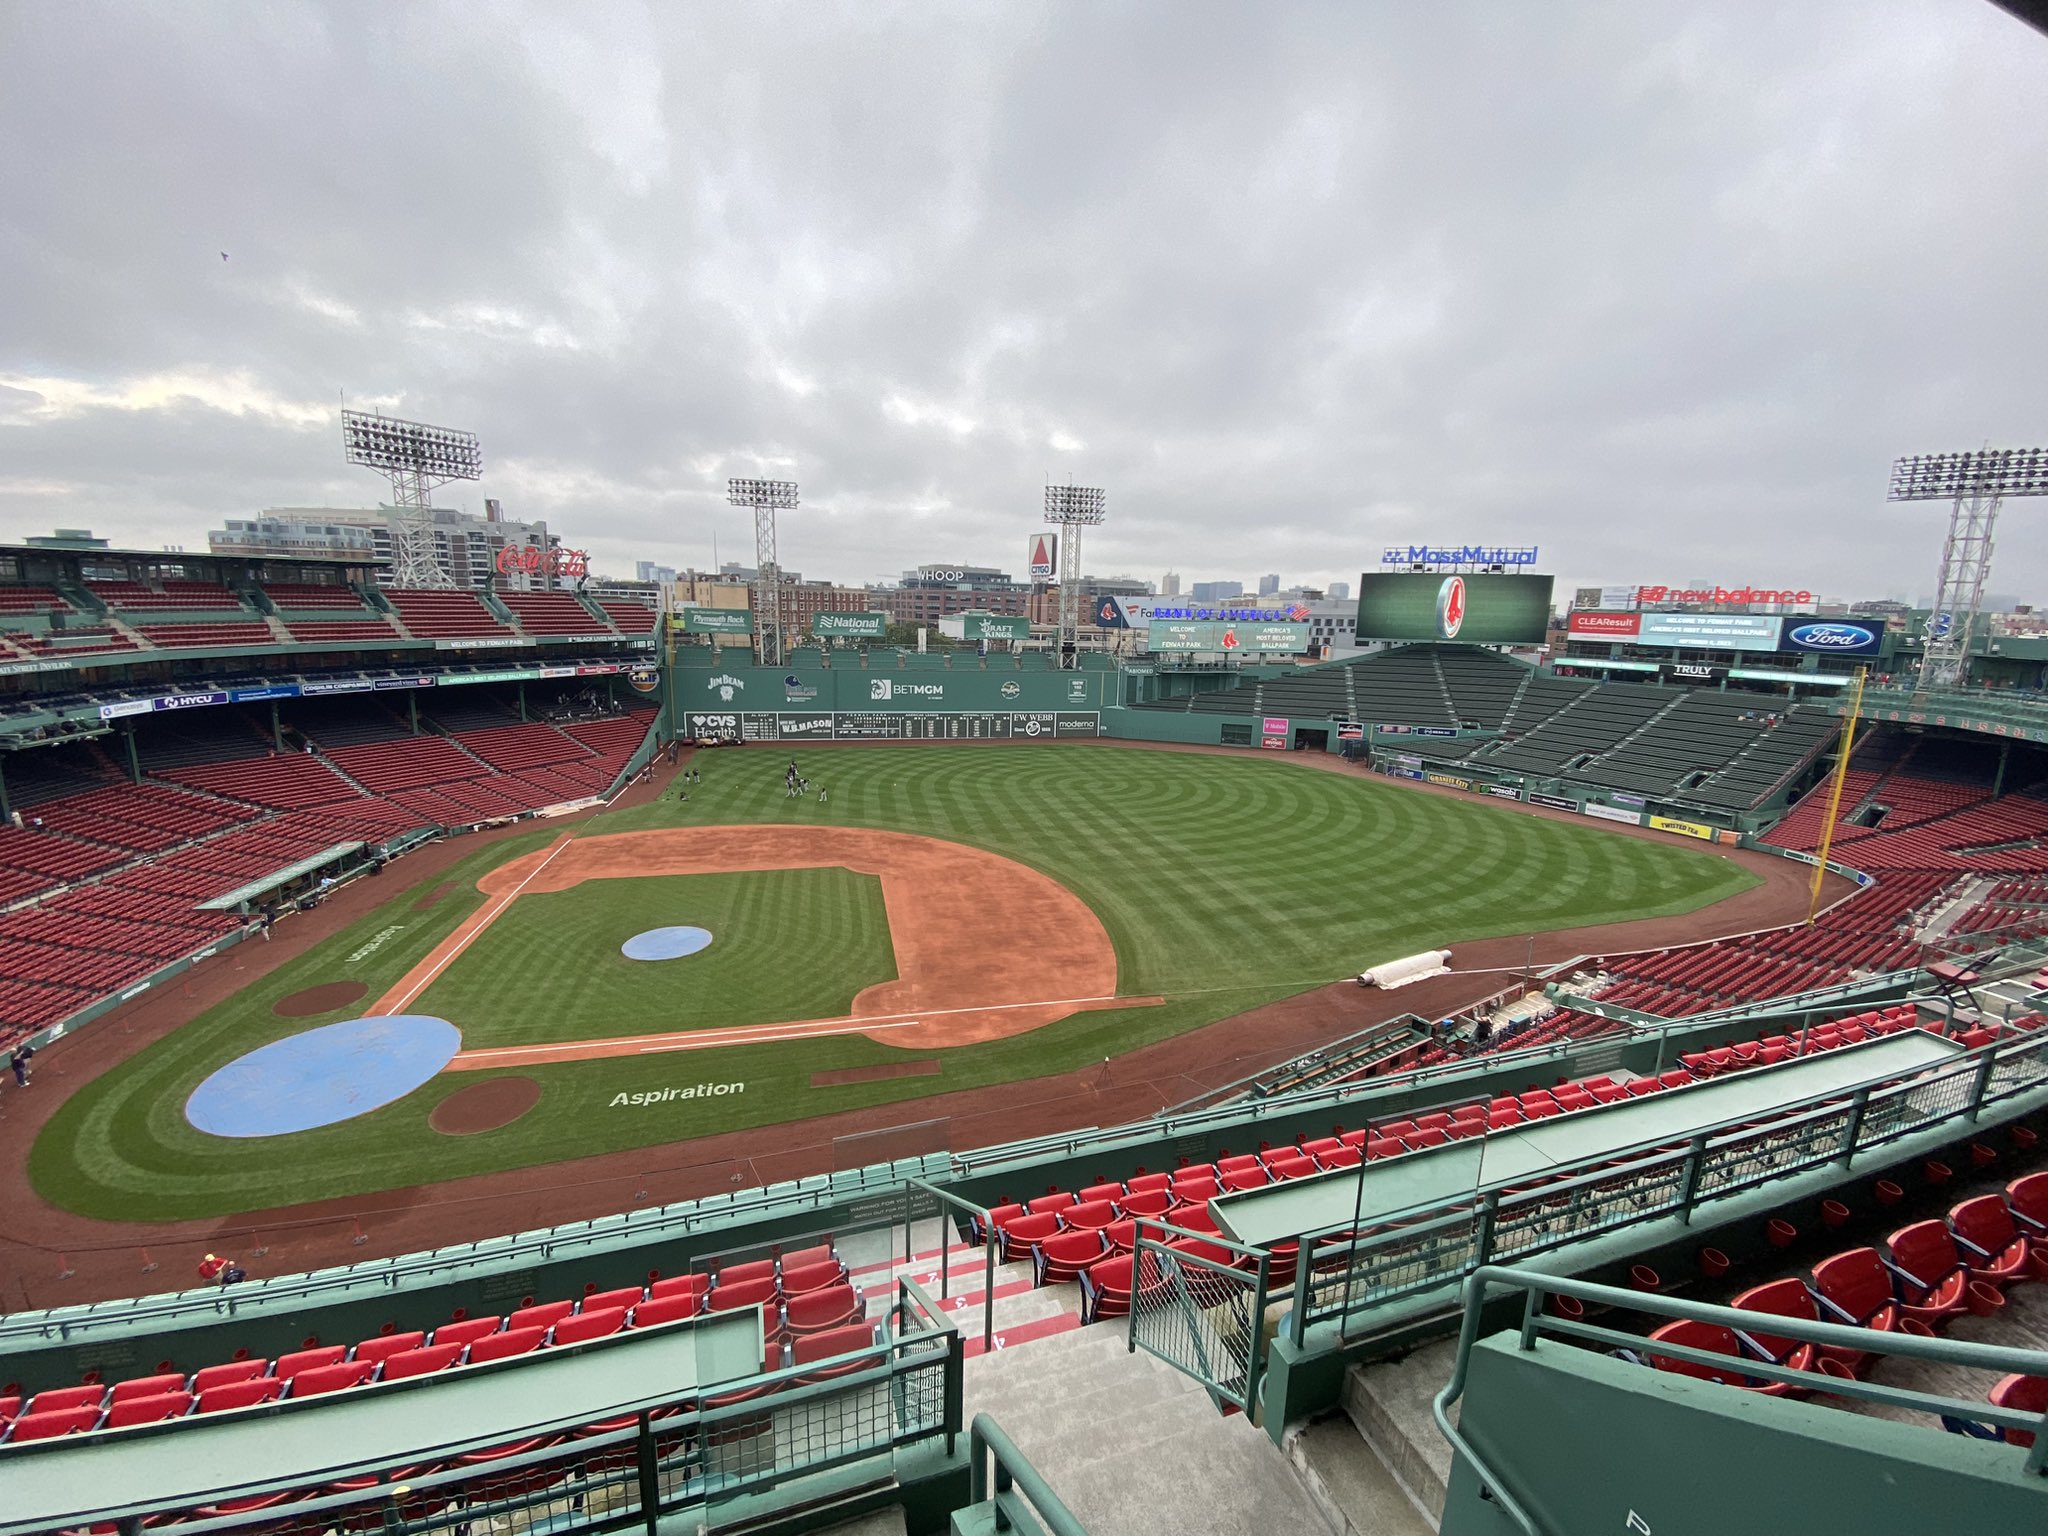 The opening game between the Yankees vs Red Sox was postponed to Tuesday due a weather trouble.